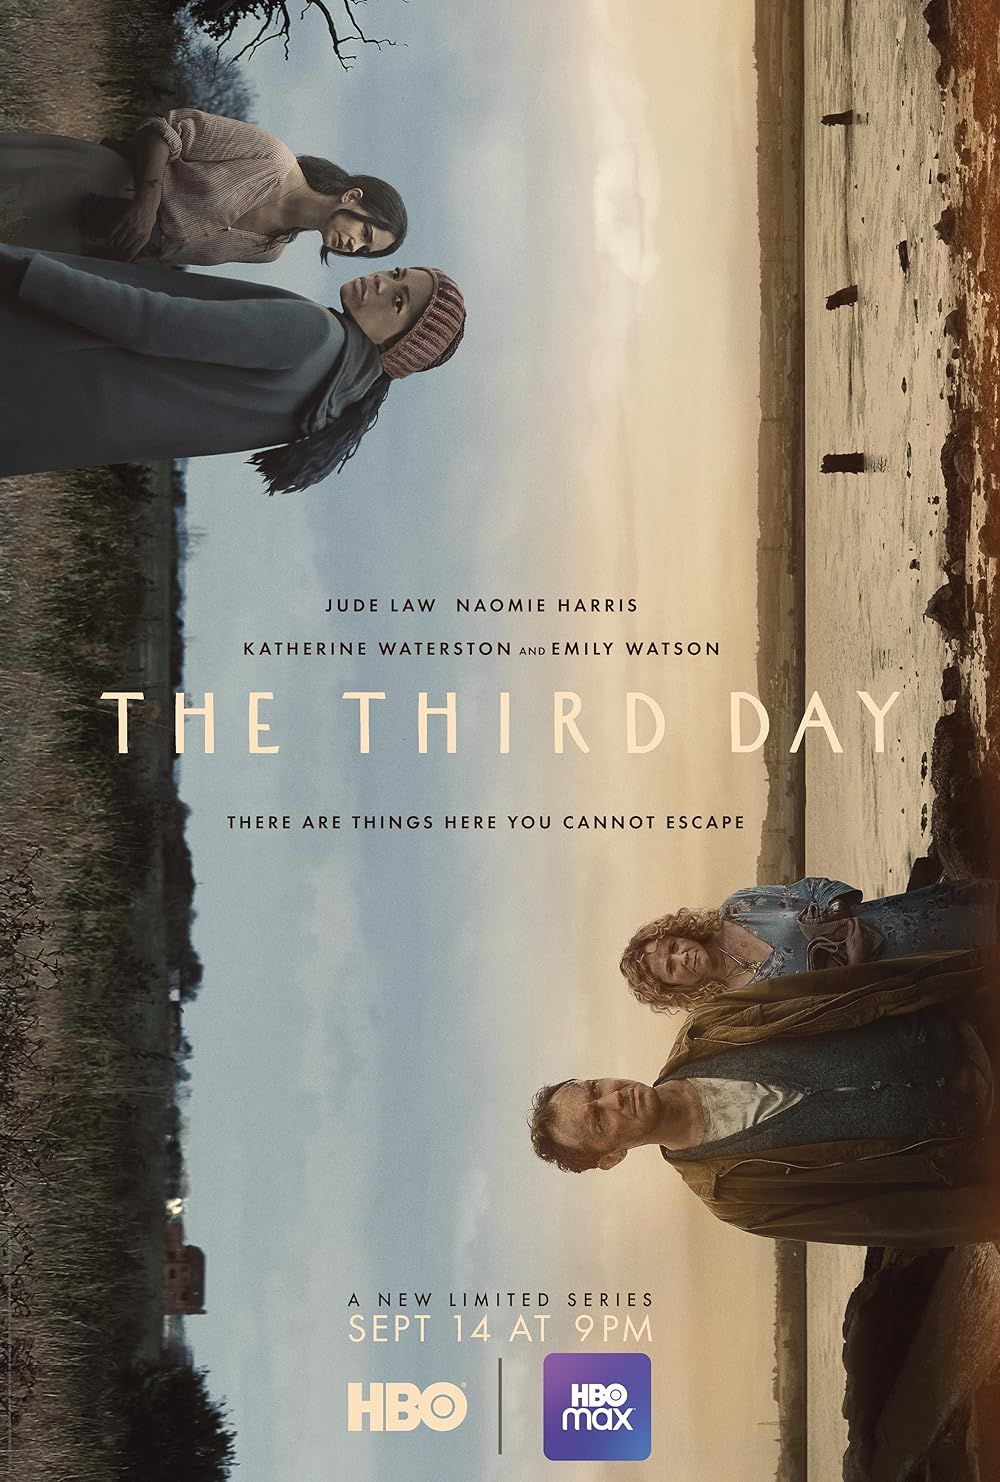 The Cast on the Third Day Promo